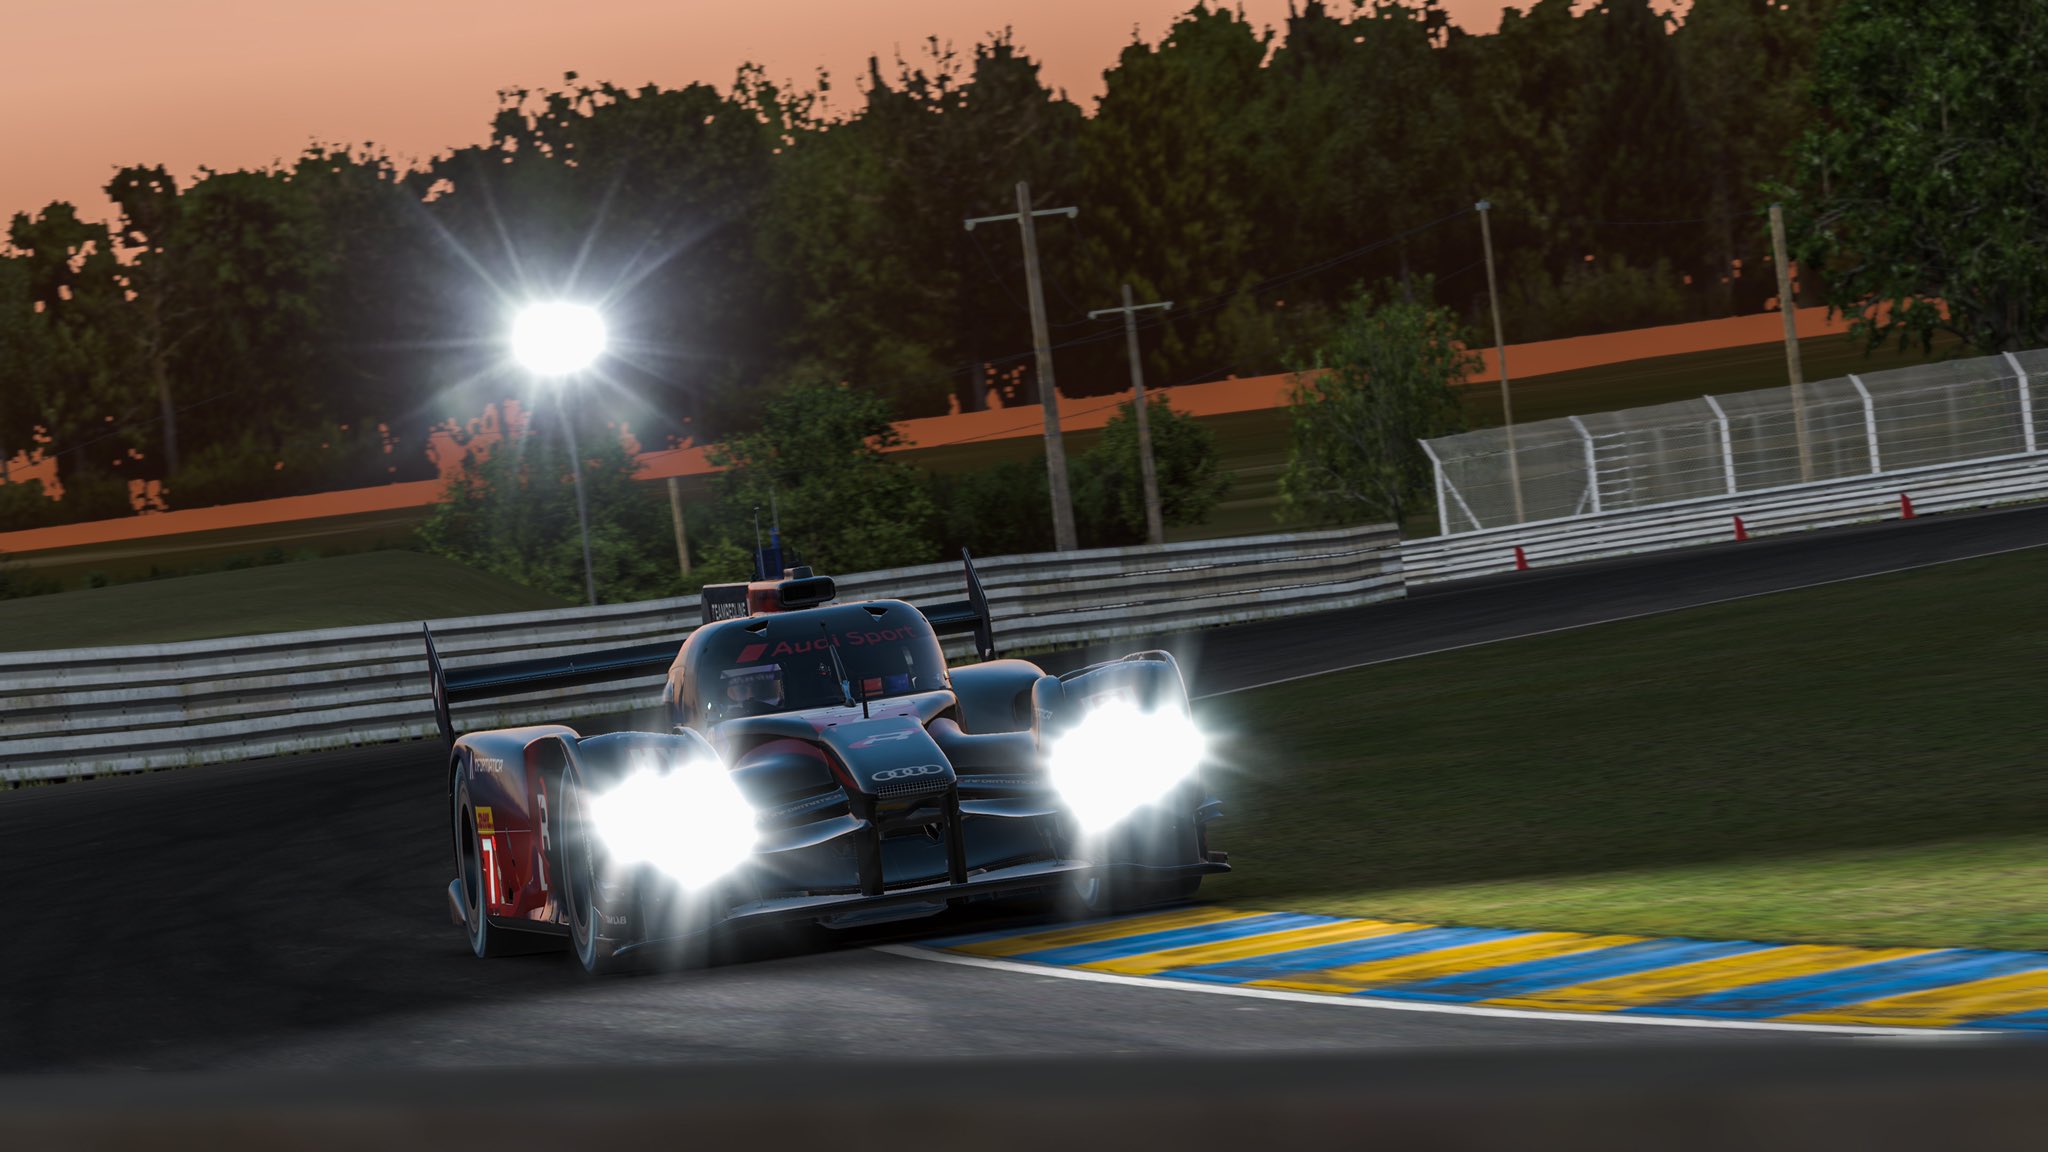 iRacing Le Mans 24 Hours: Team Redline win by narrow amrgin